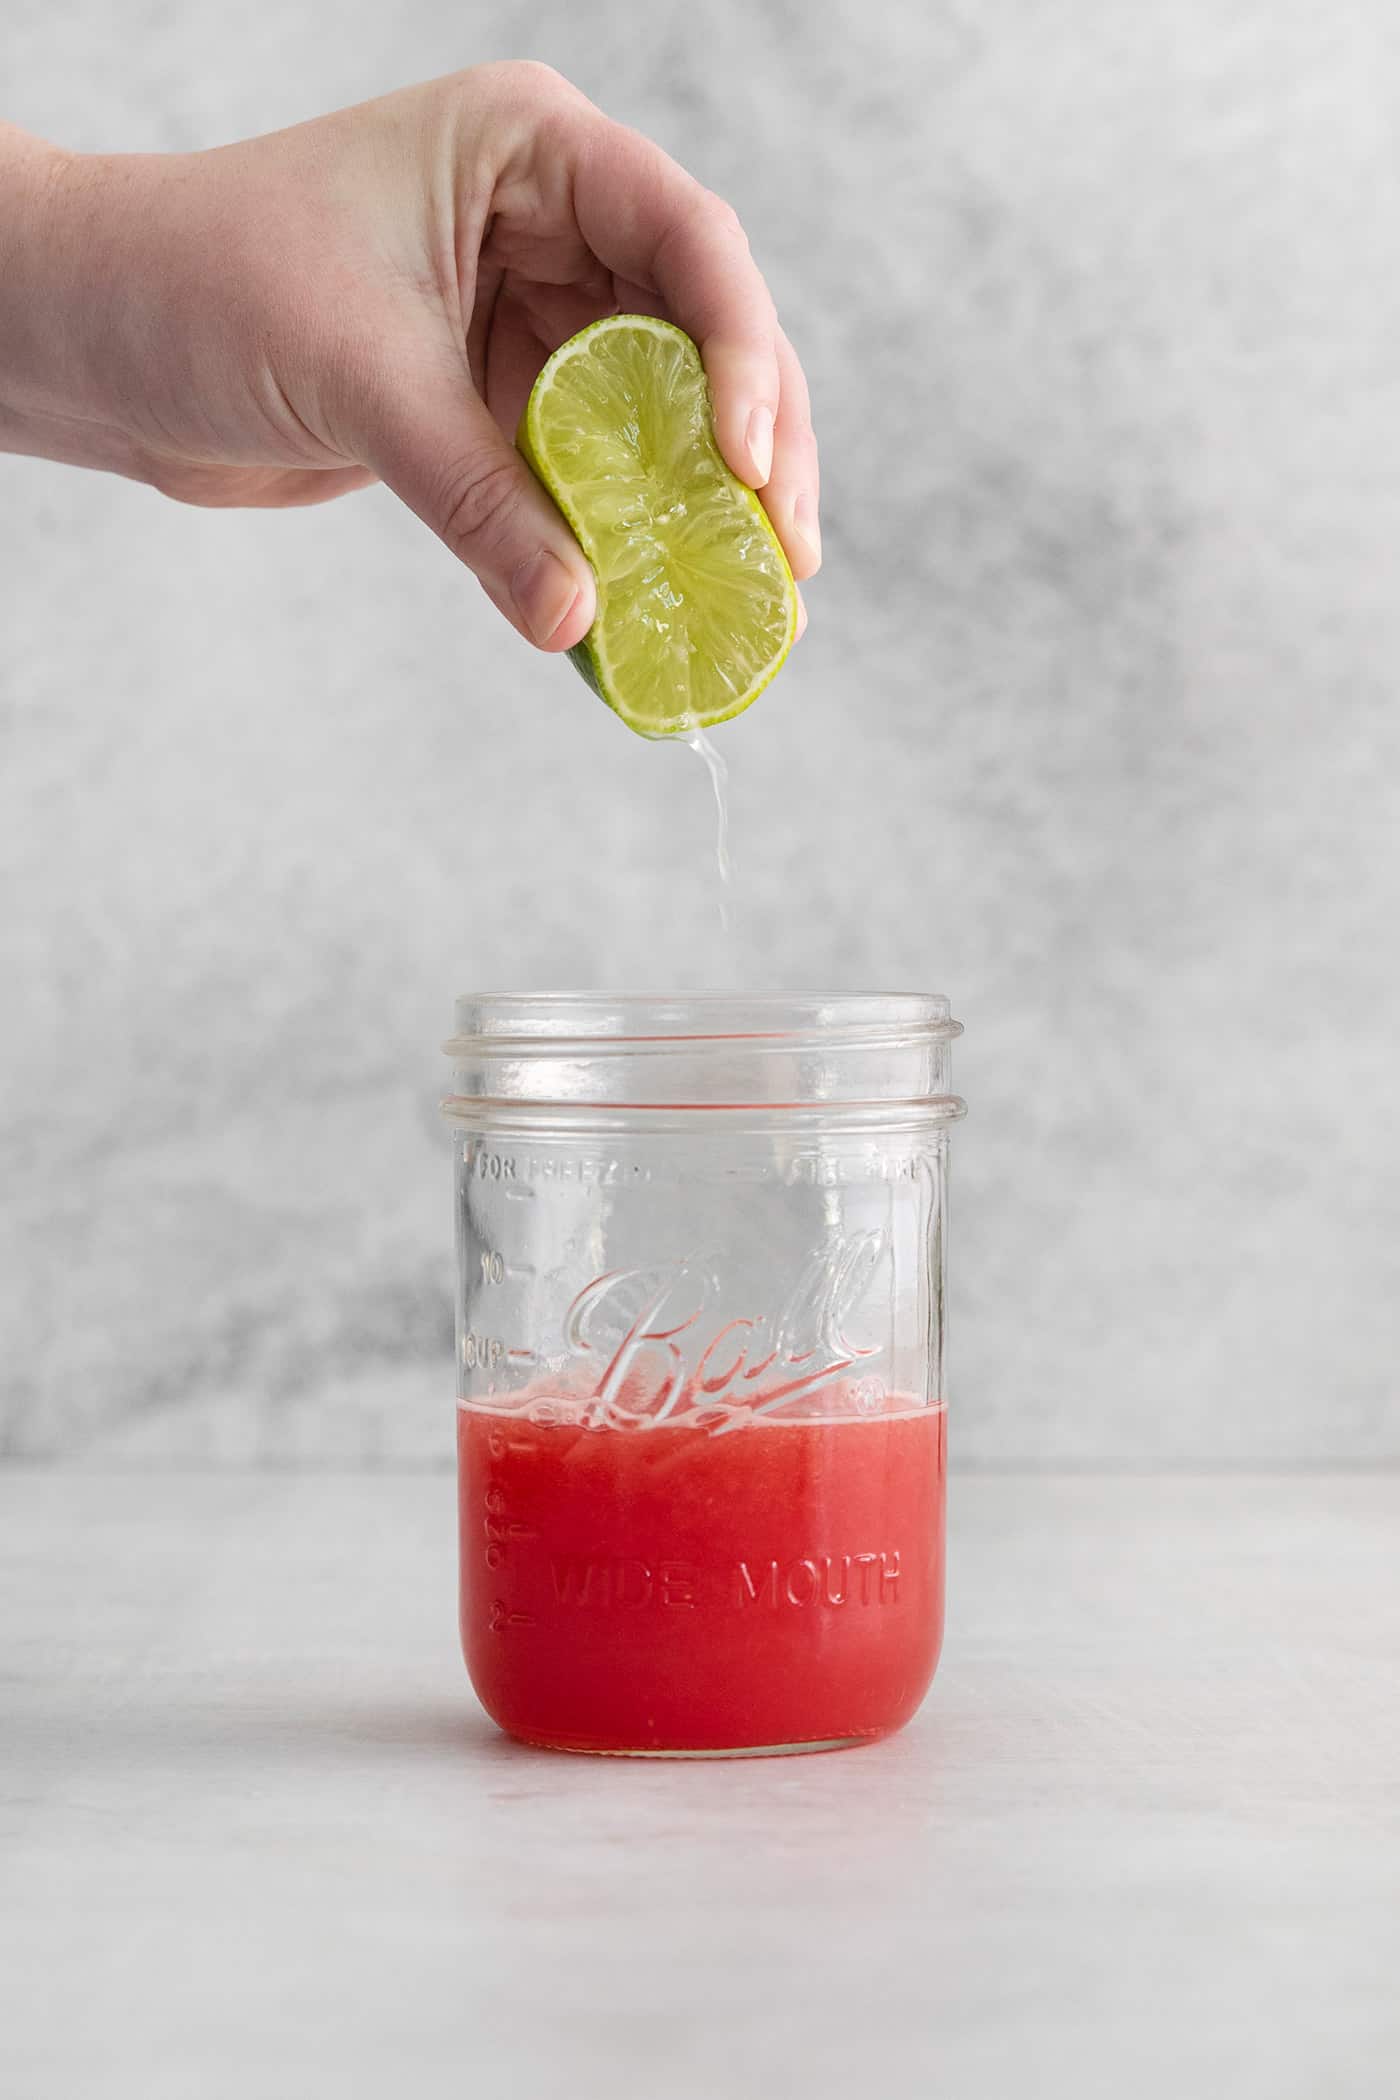 squeezing lime into a jar